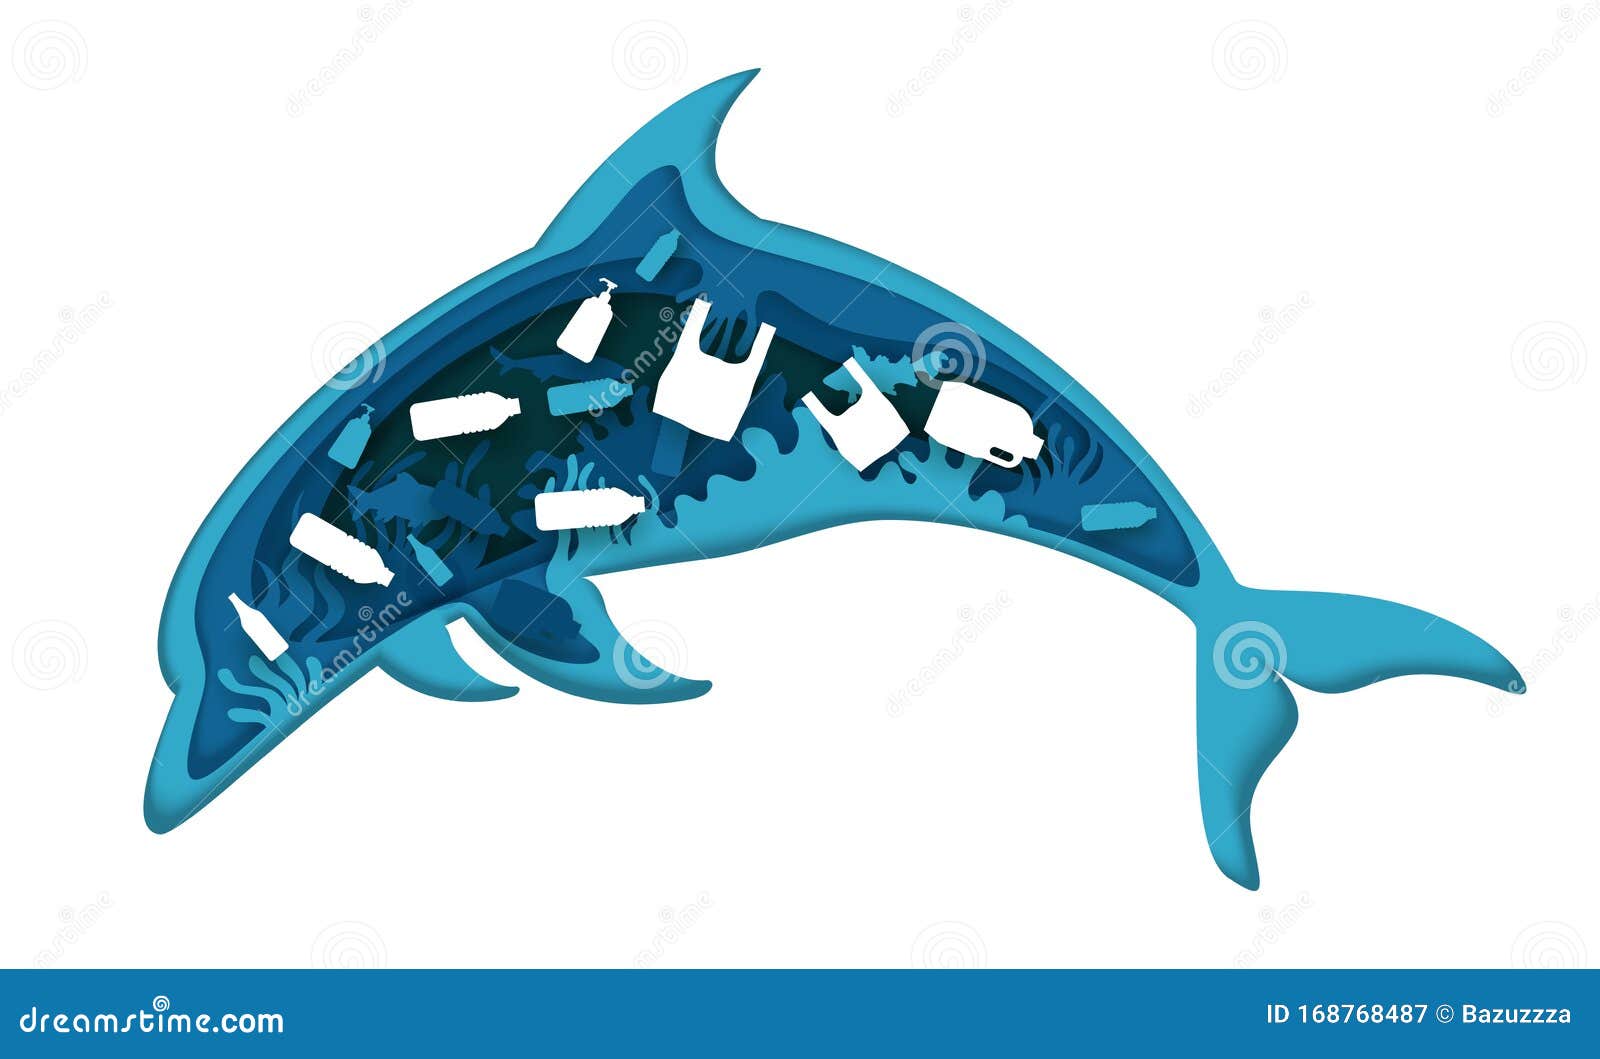 Download Ocean Pollution Vector Illustration In Layered Paper Art Style Stock Vector Illustration Of Dolphin Agitational 168768487